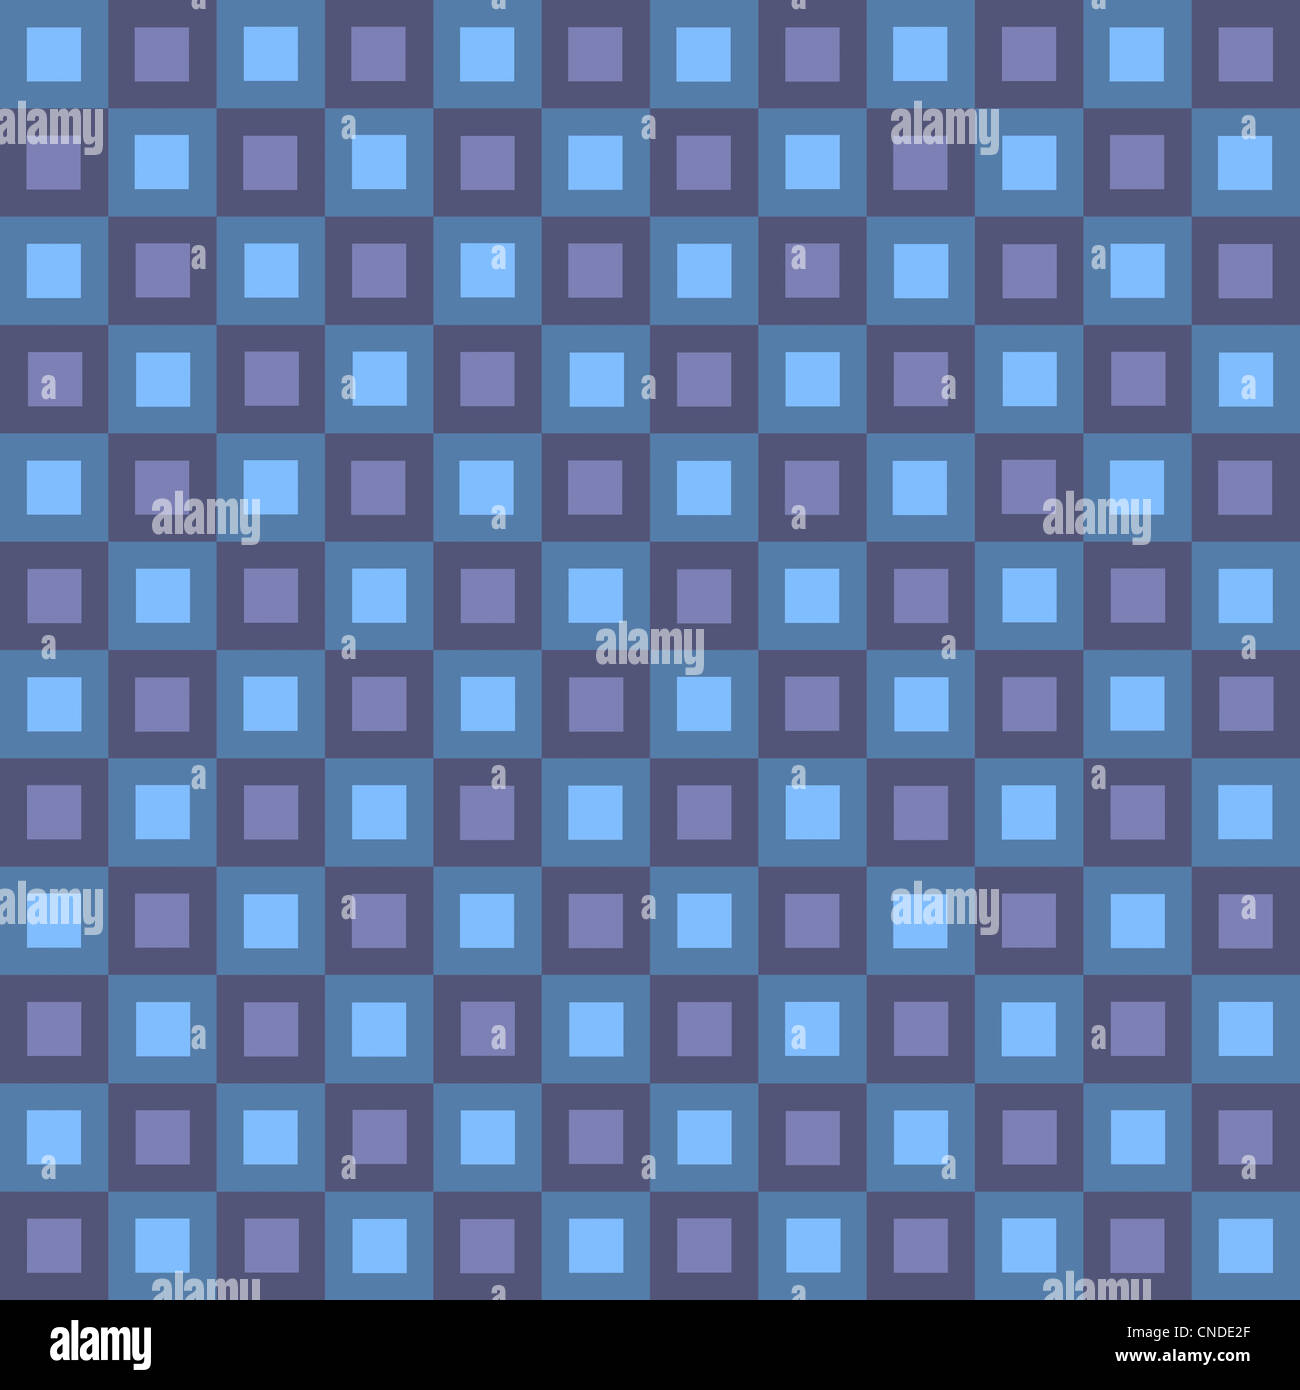 Seamless squares texture that works great as a pattern. Stock Photo